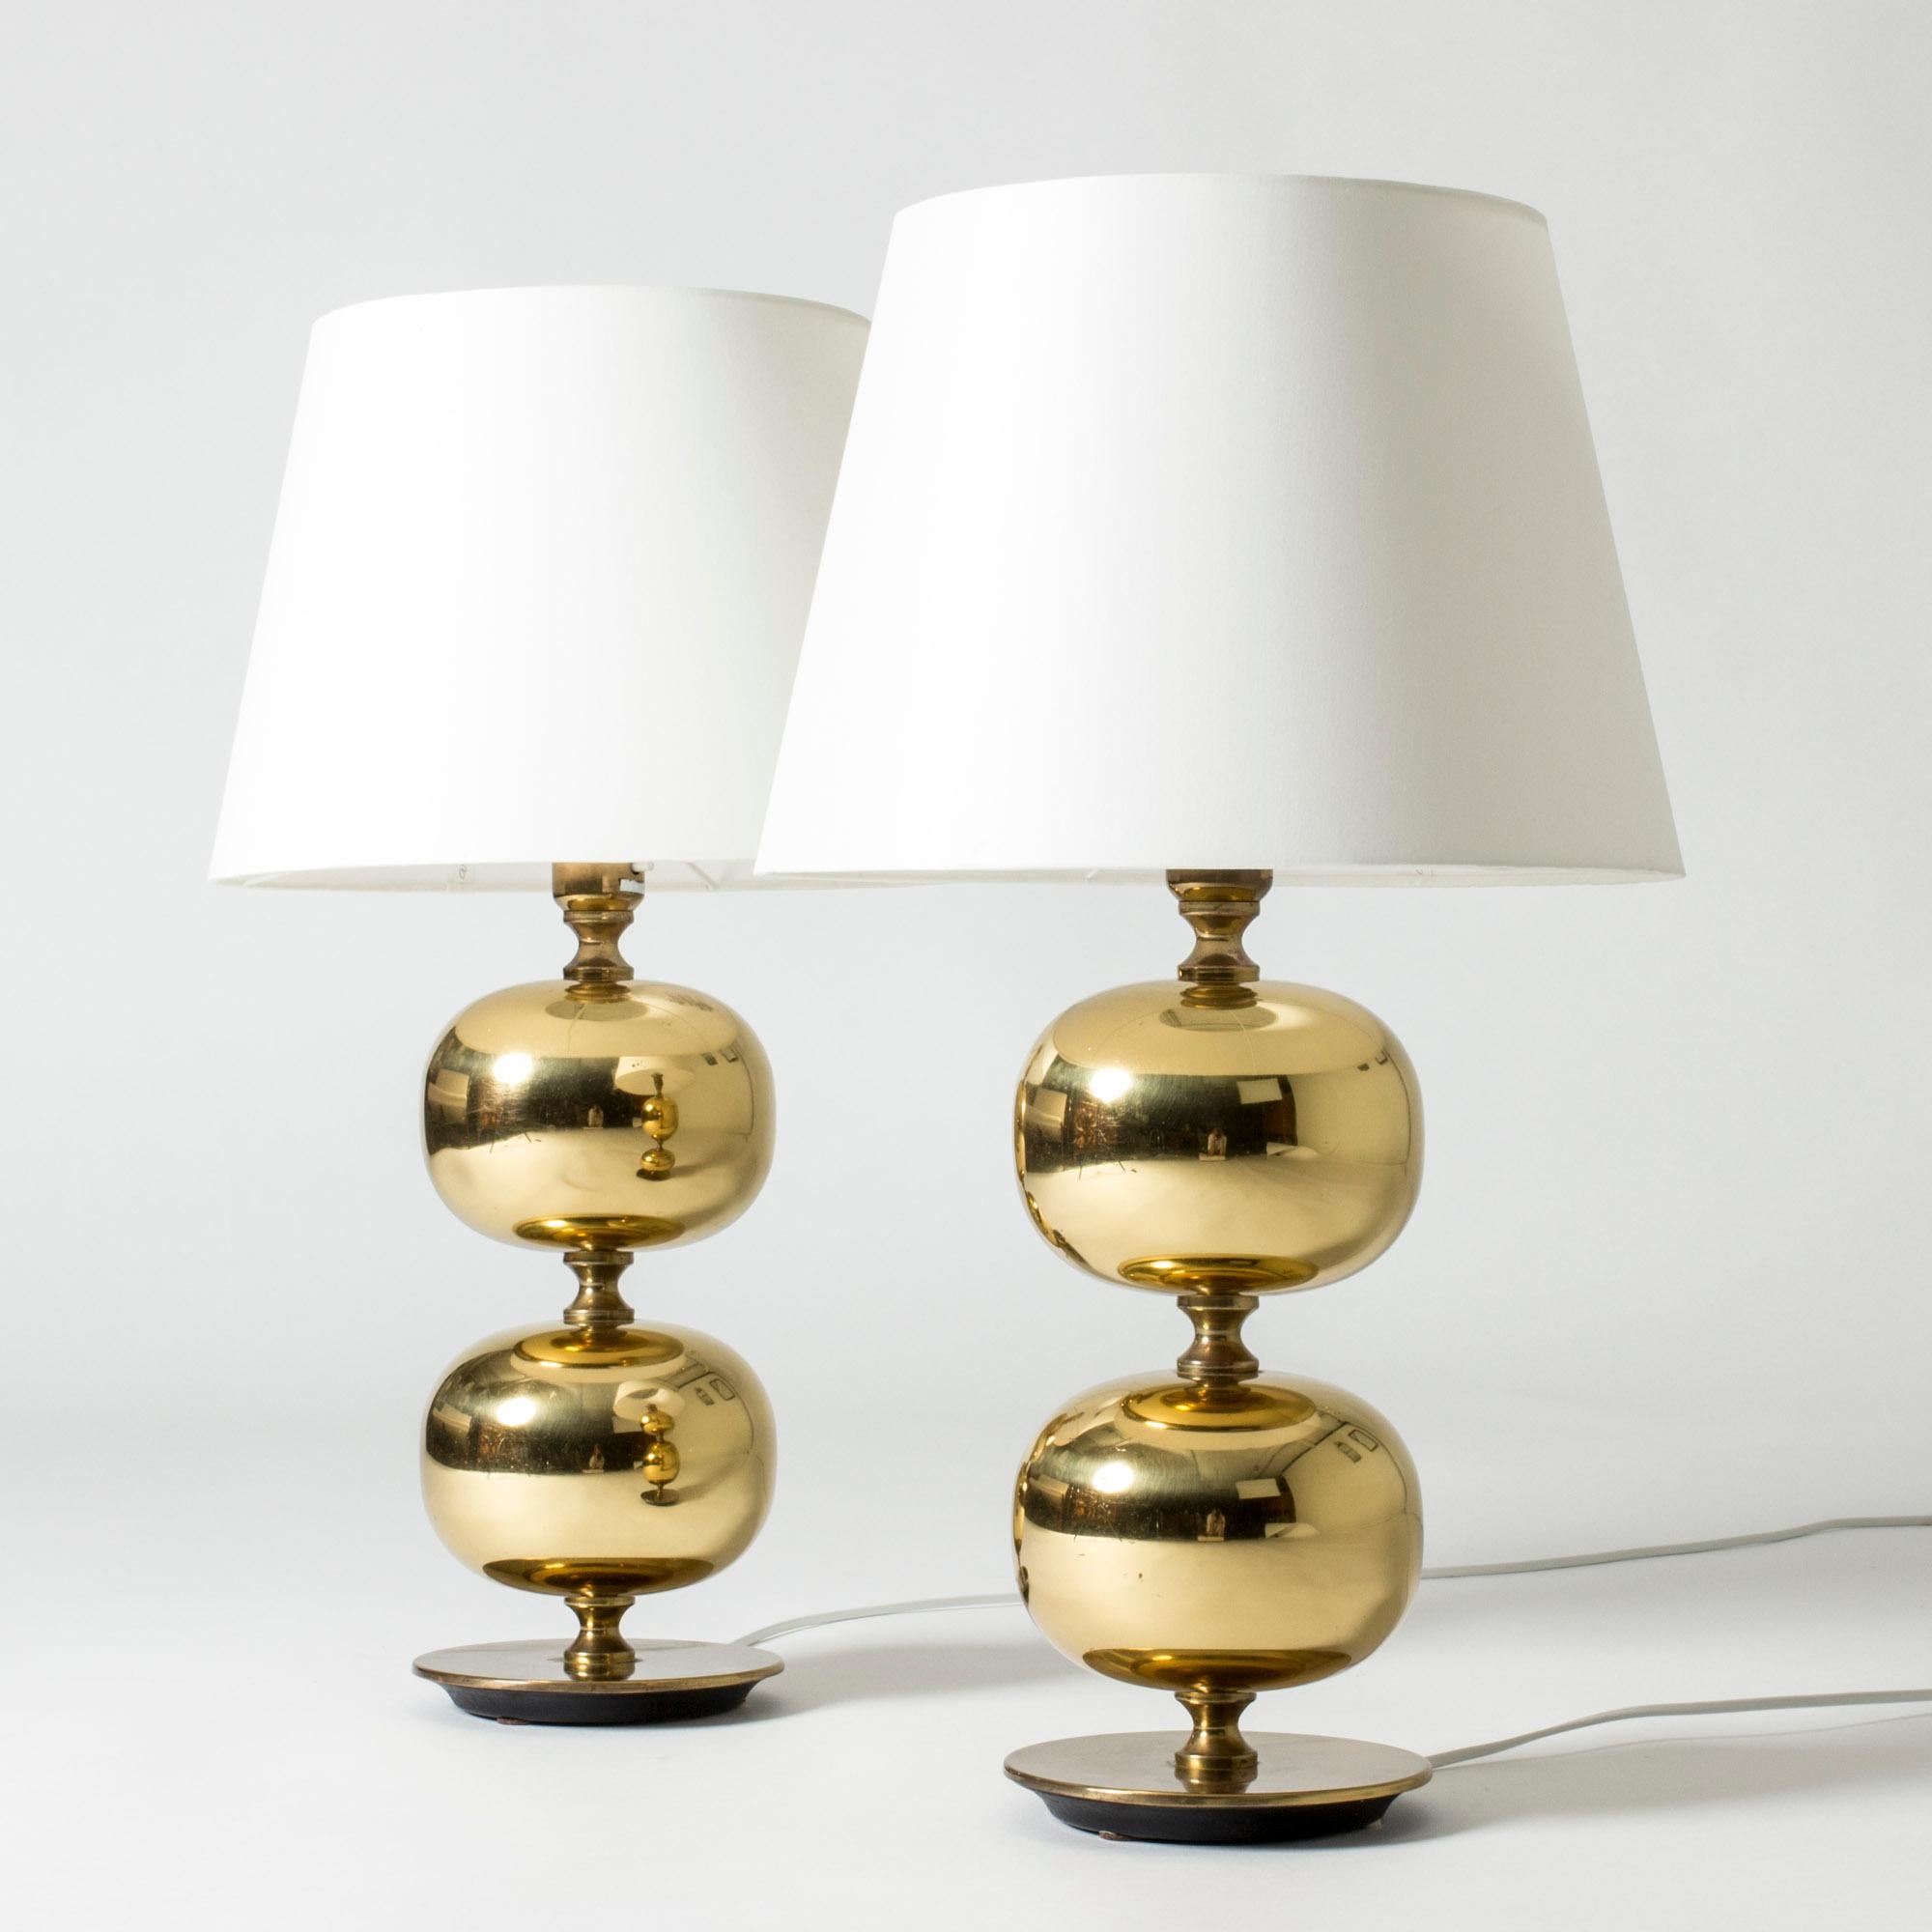 Pair of beautiful bulbous brass table lamps by Henrik Blomqvist for Tranås Stilarmatur. Large size.

The model was designed in 1959, when Henrik Blomqvist was creative director at Tranås Stilarmatur. They quickly became a design classic that were